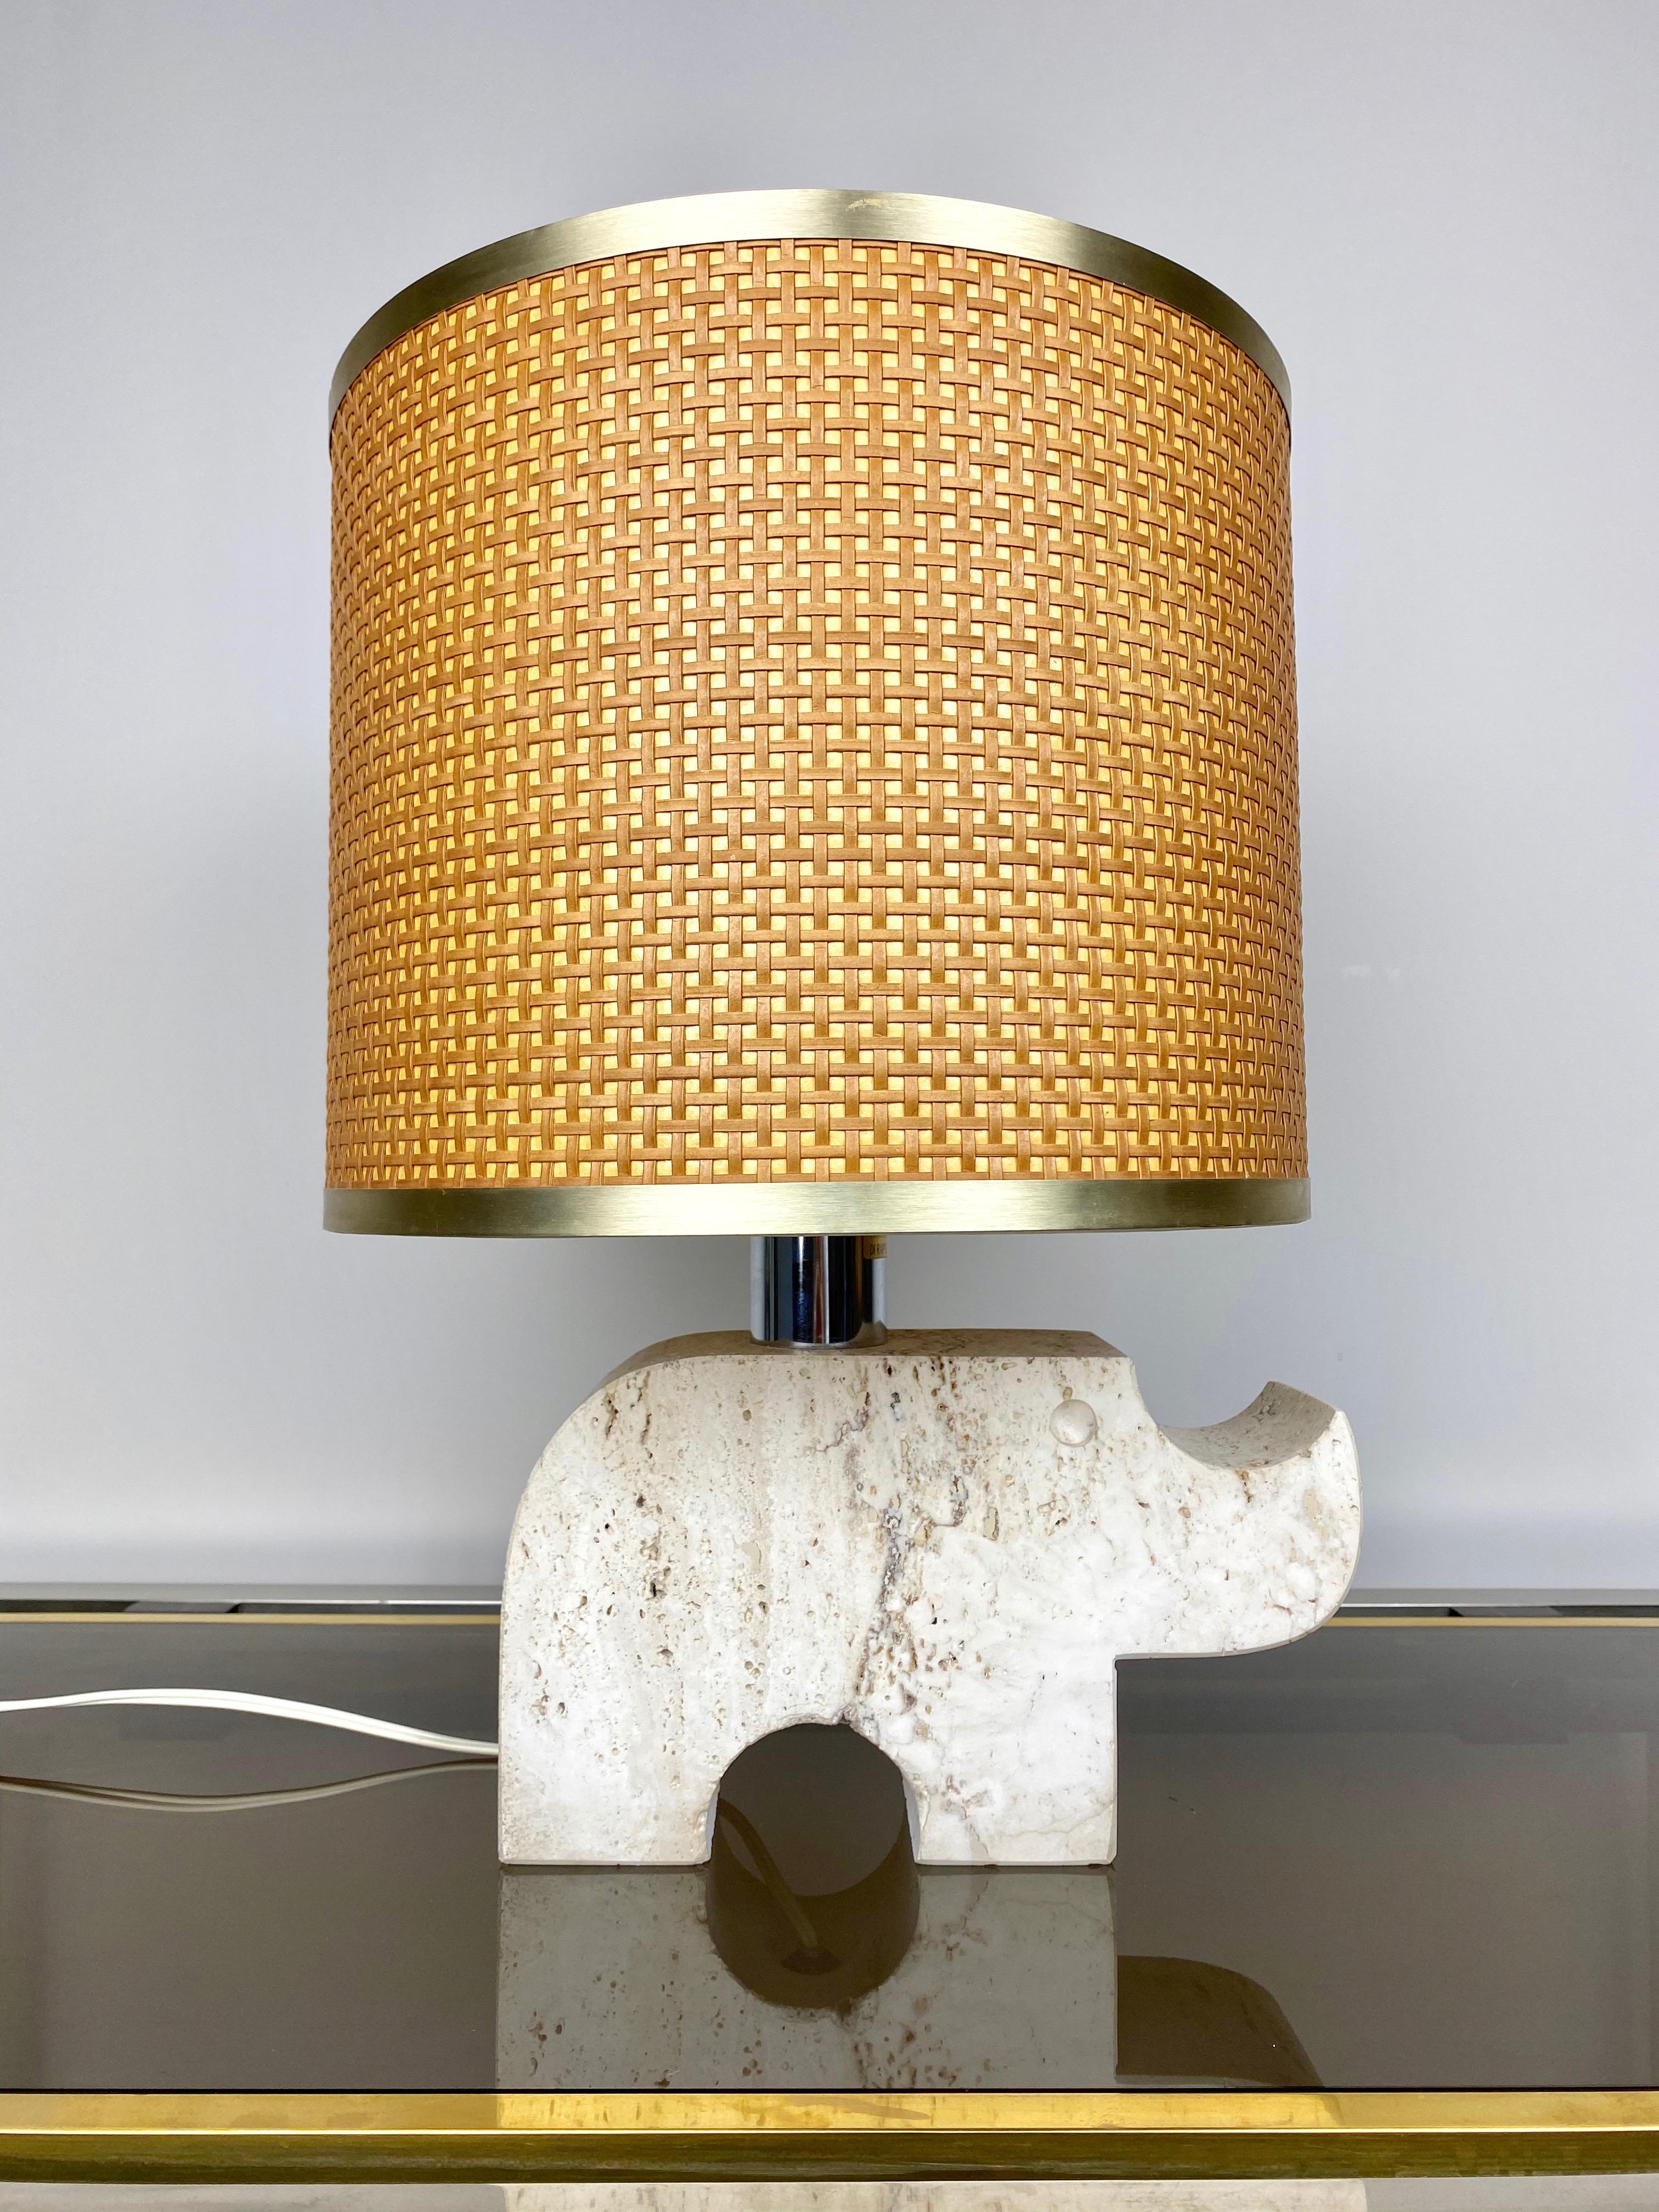 Table lamp in travertine marble of Rapolano with the base in the shape of a rhino by the Italian Fratelli Mannelli (original label still attached), 1970s. 

Dimensions without lampshade: 24 H x 26 W x 8 D (cm)

Dimensions with lampshade: 45 H x